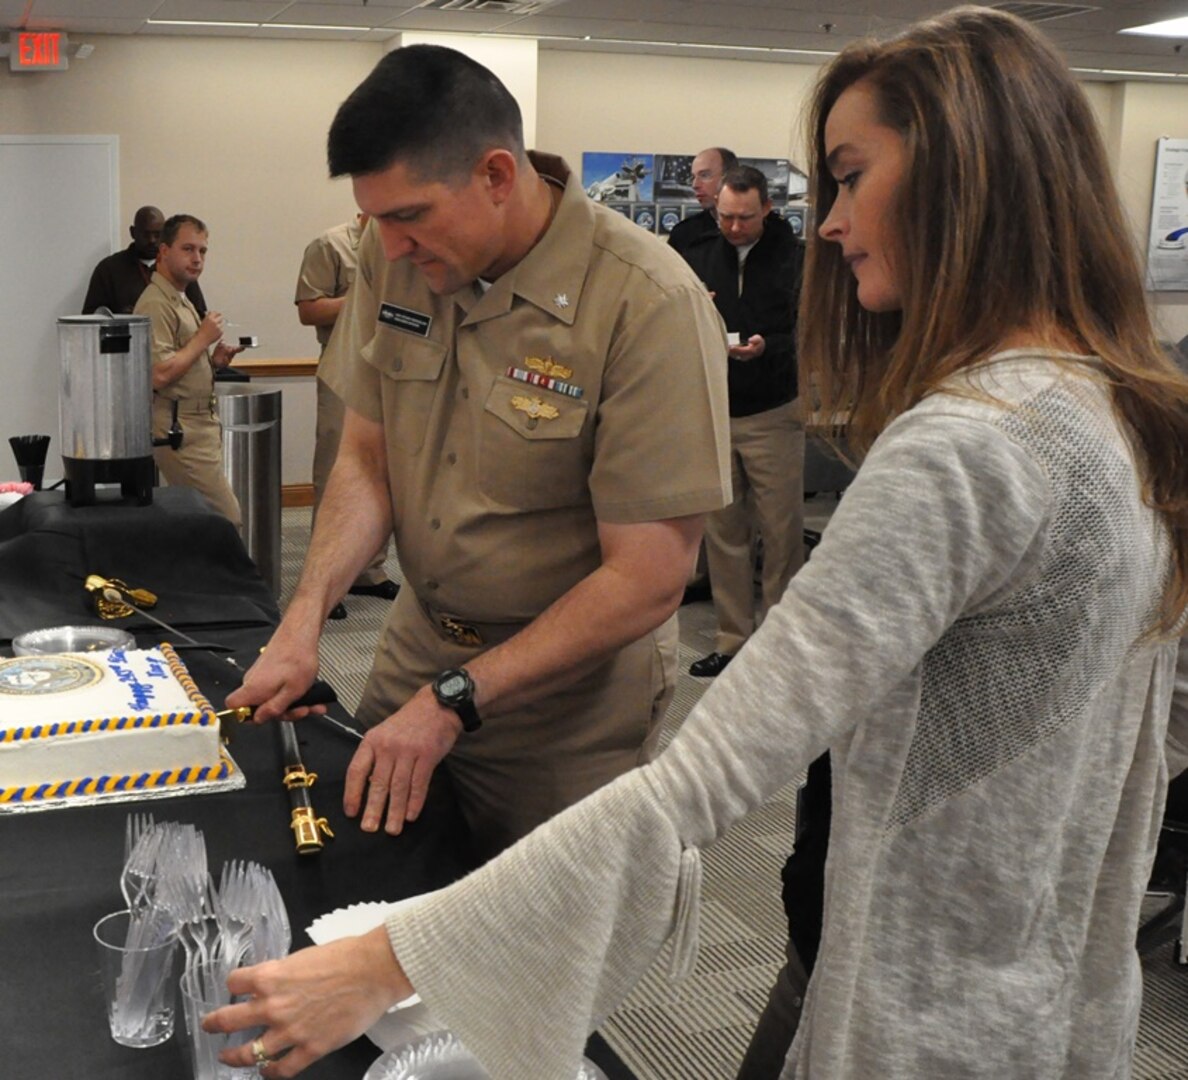 IMAGE: DAHLGREN, Va. (Oct. 12, 2018) - Cmdr. Steven Perchalski cuts the cake for those celebrating the Navy's 243rd birthday at the Naval Surface Warfare Center Dahlgren Division (NSWCDD). NSWCDD will celebrate 100 years of cutting-edge technological innovation in support of the warfighter at a centennial grand finale event Oct. 19 that includes an exhibition tent, a U.S. Navy Band performance, and historic tours featuring six station stops on base.